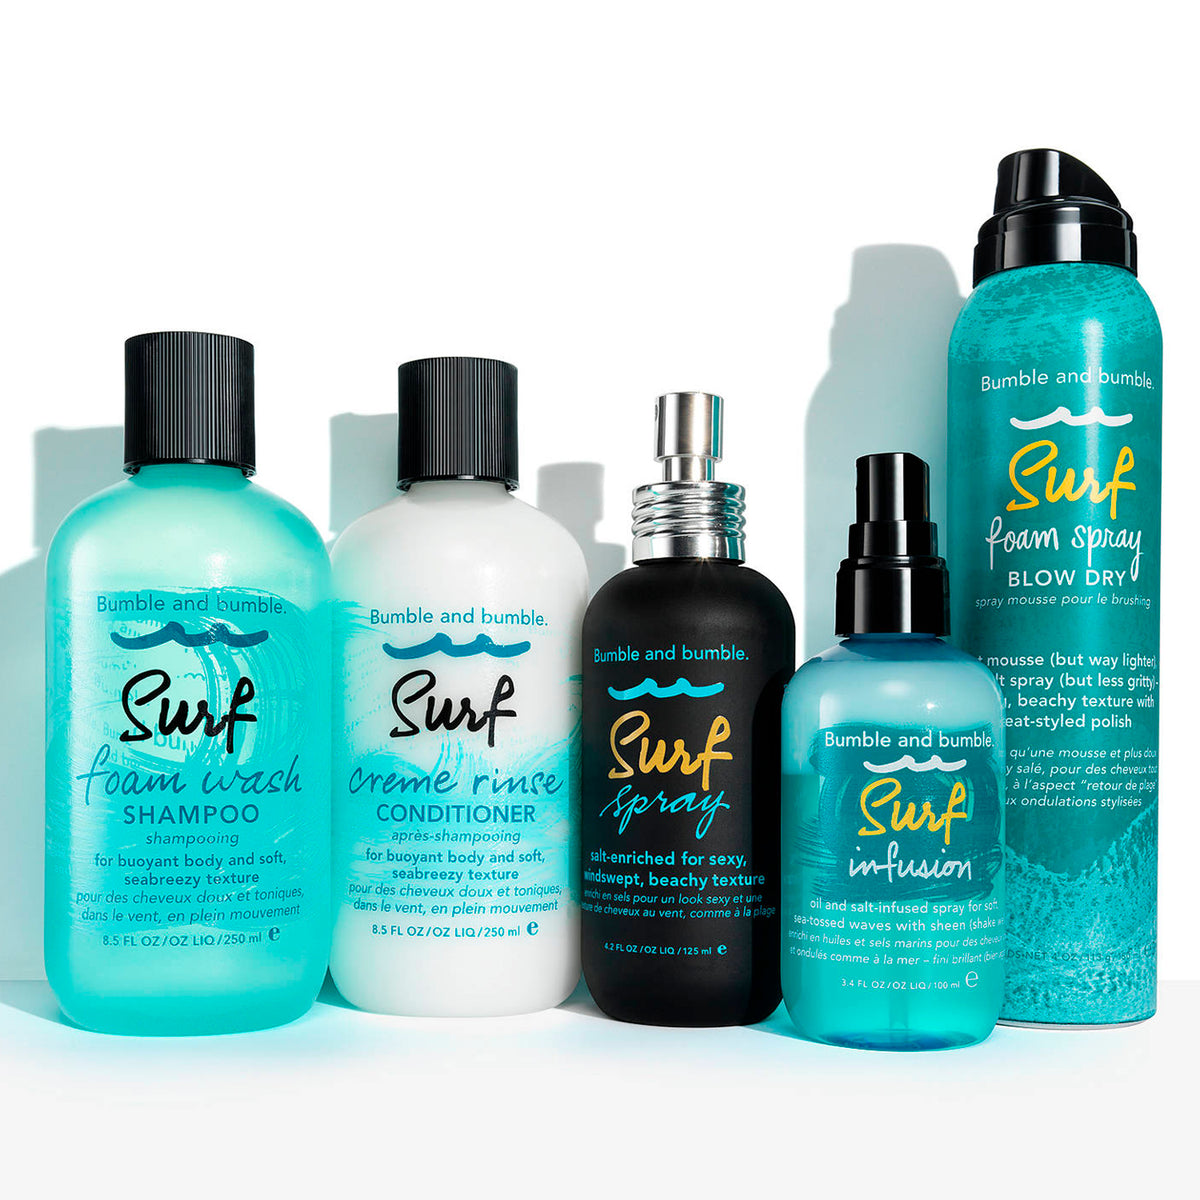 Bumble and Bumble Surf Spray Salt Spray for Beachy Windswept